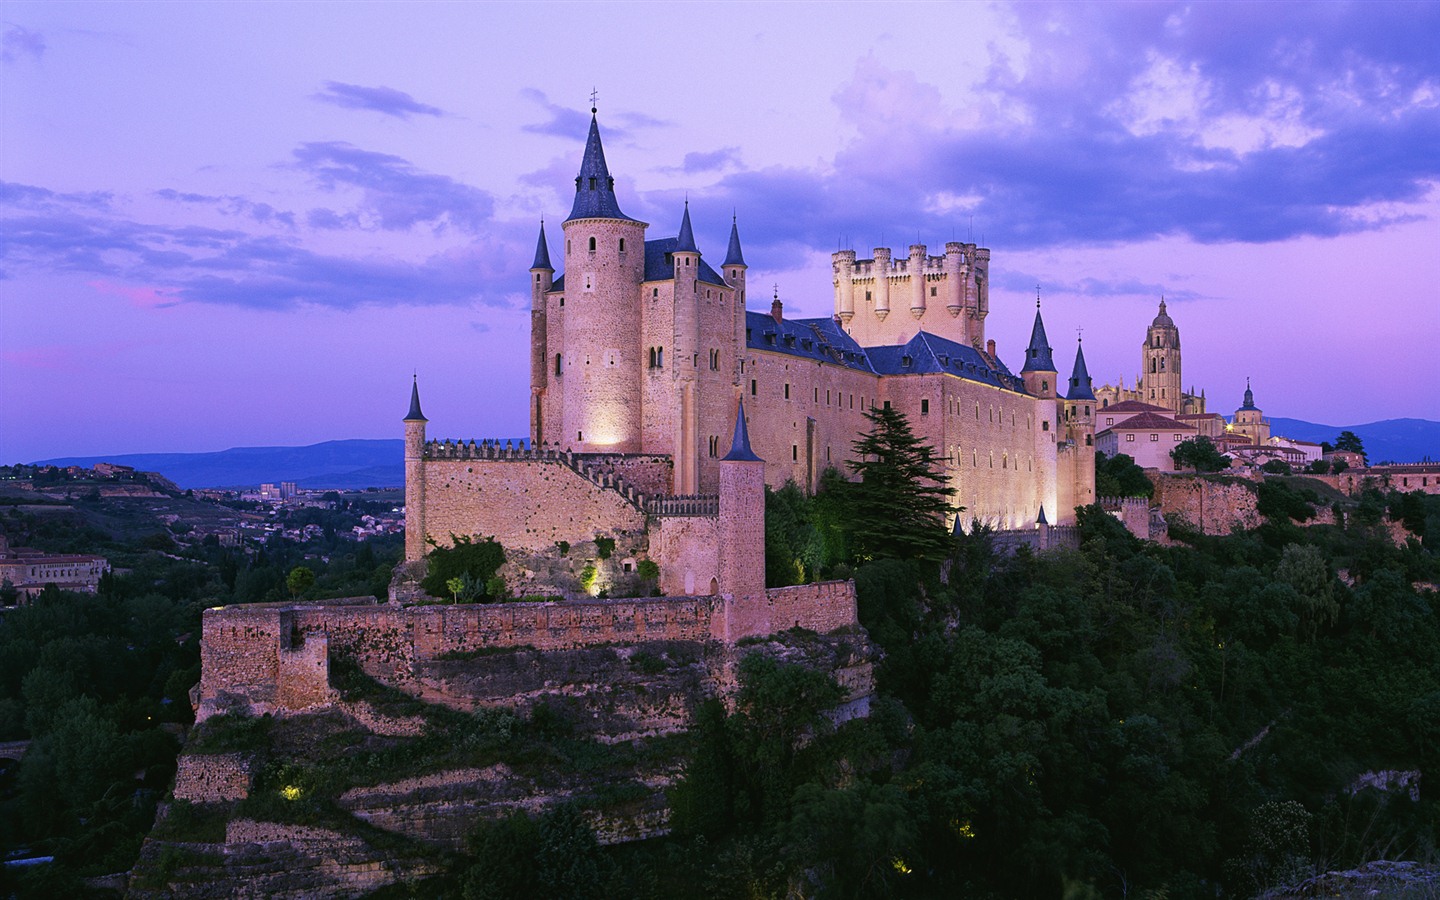 Windows 7 Wallpapers: Castles of Europe #1 - 1440x900